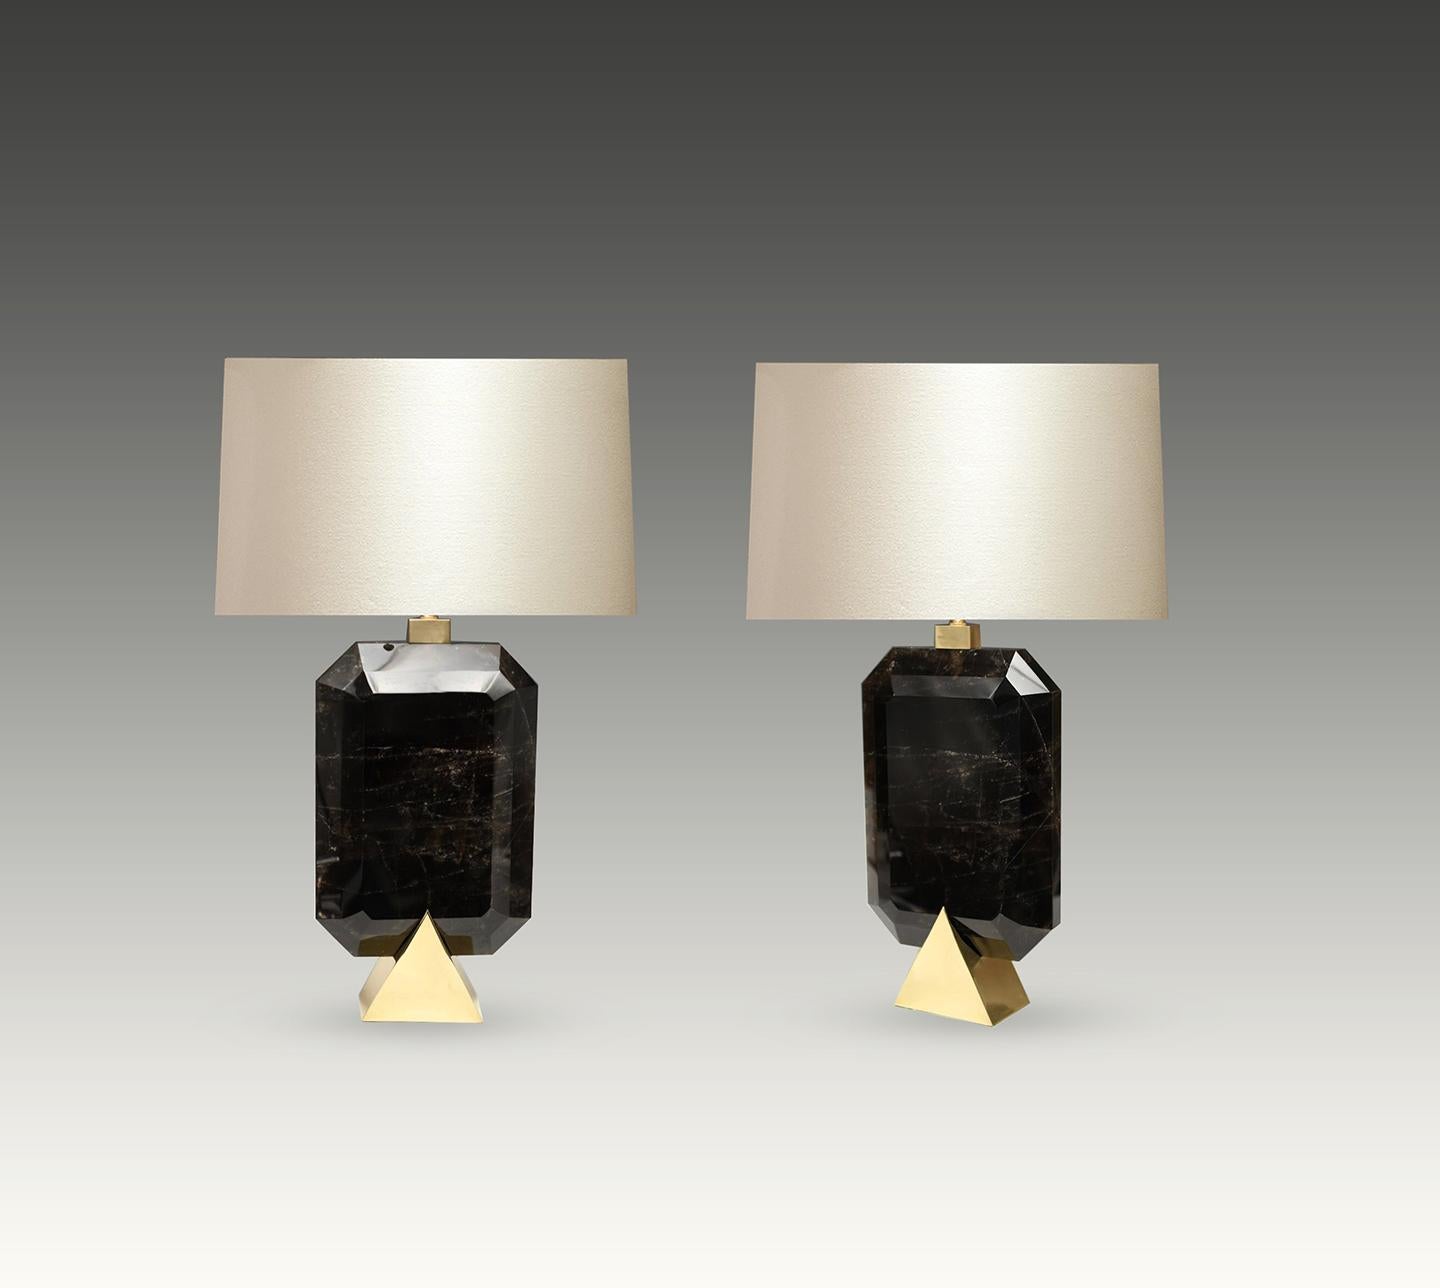 Pair of fine carved smoky rock crystal lamps with polished brass bases created by Phoenix Gallery. 

To the top of rock crystal height: 17 inch. 
(Lampshade not included).